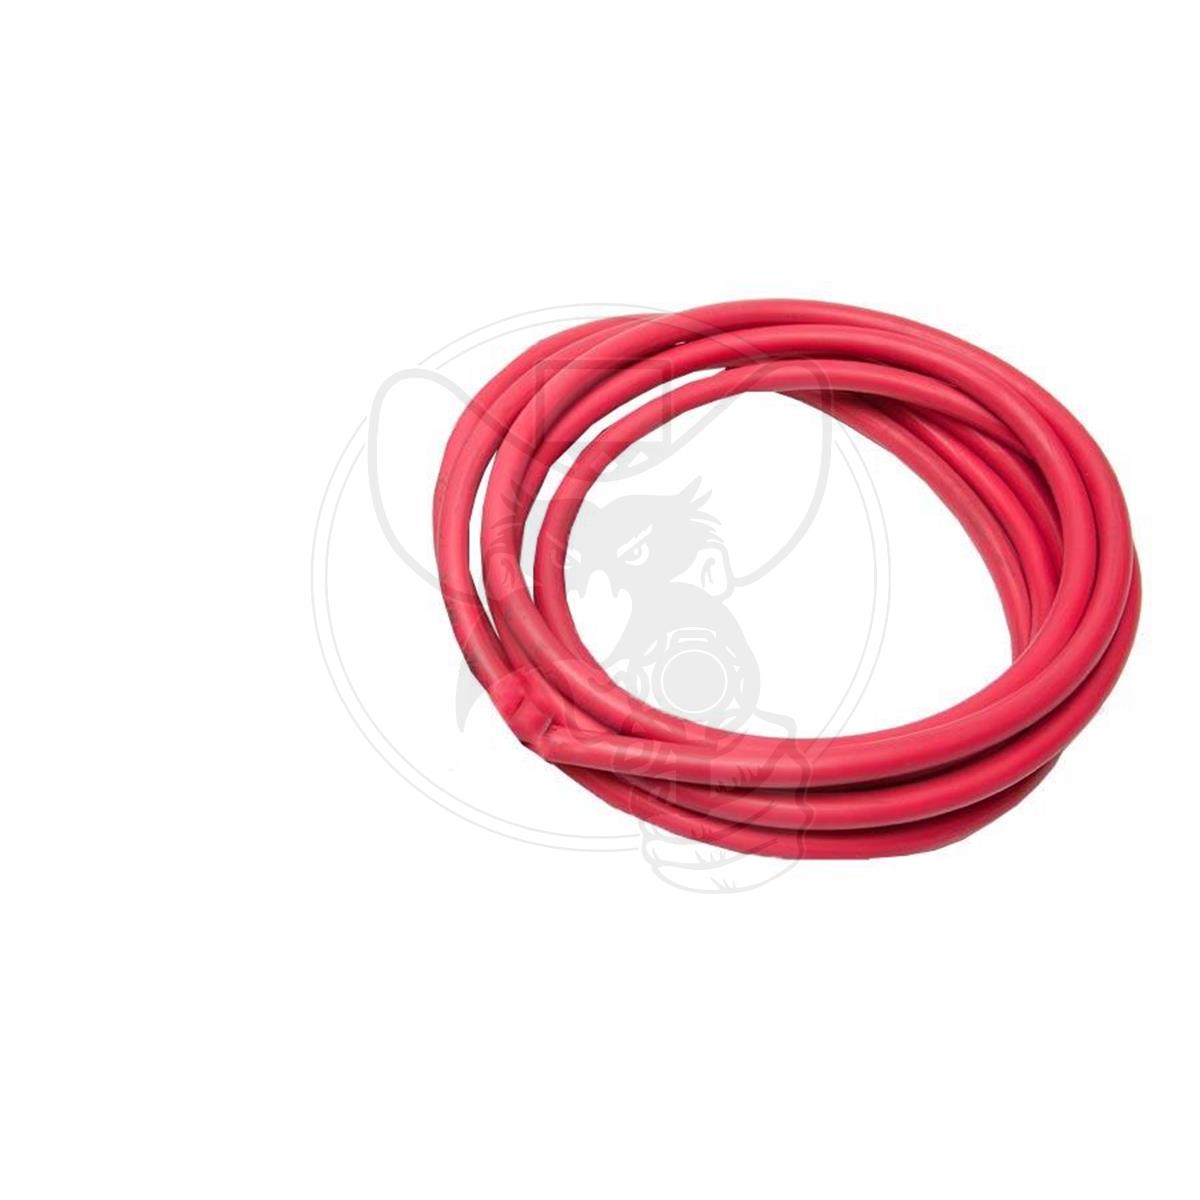 PROFLOW BATTERY CABLE RED (POSITIVE) 2 B&S PER 5 METER LENGTH